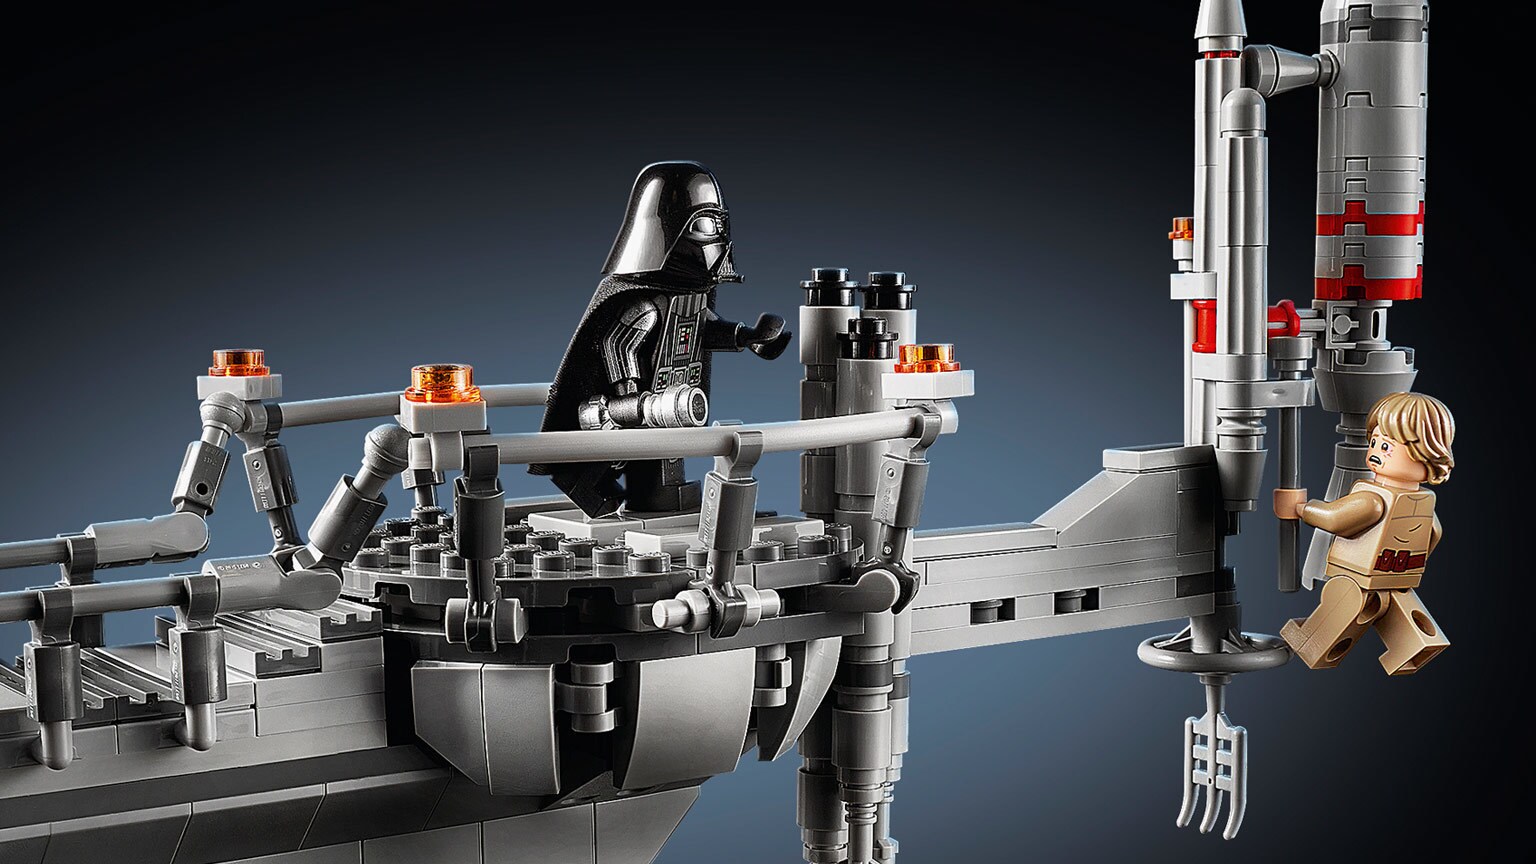 Empire at 40 | The LEGO Star Wars “Bespin Duel” Set Celebrates the Moment That Changed Everything